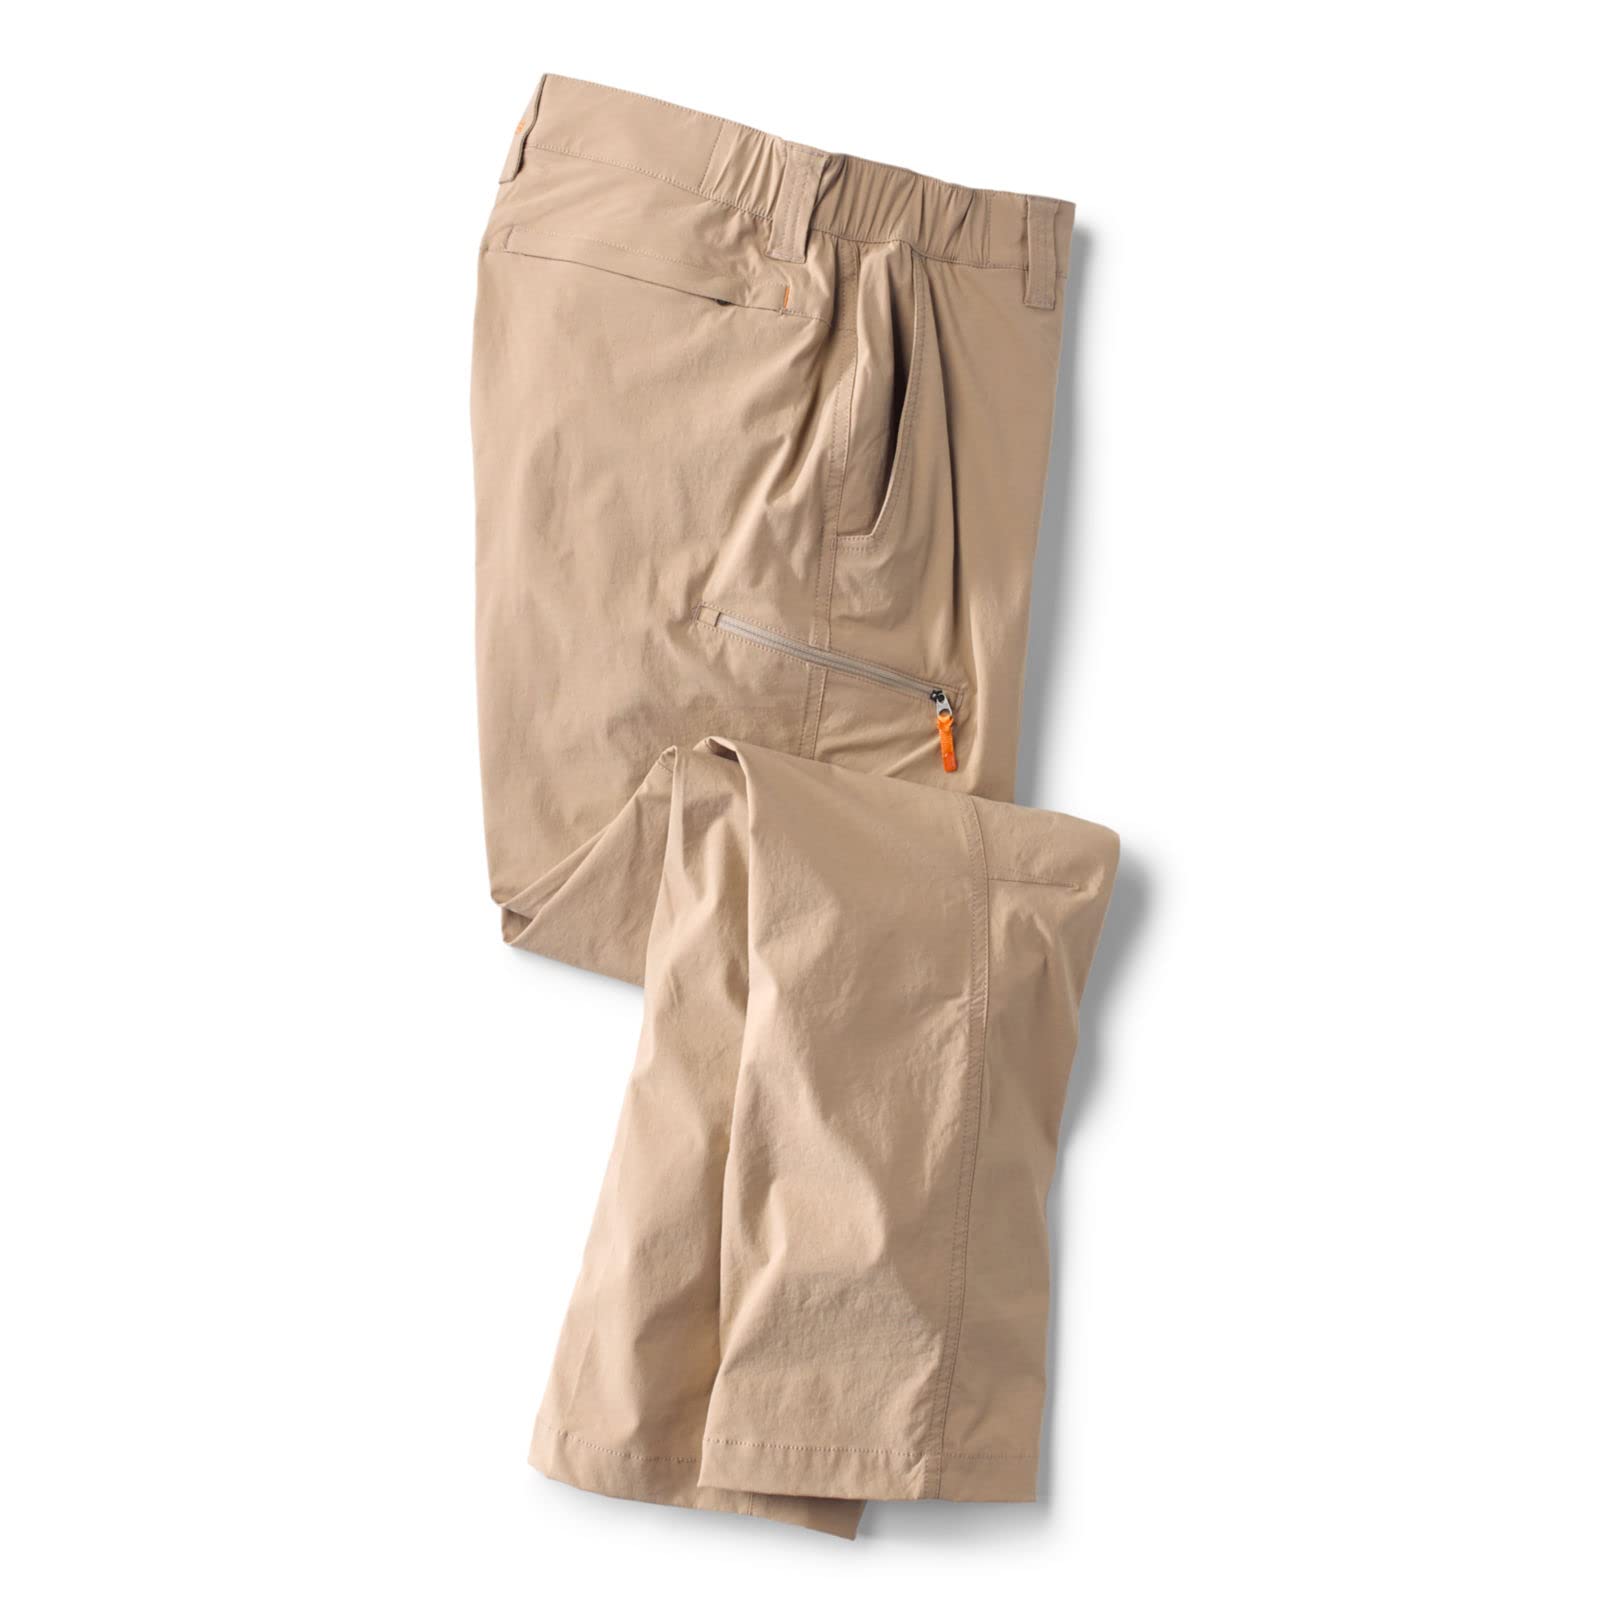 Amazon Shoppers Love These Lightweight Cargo Hiking Pants